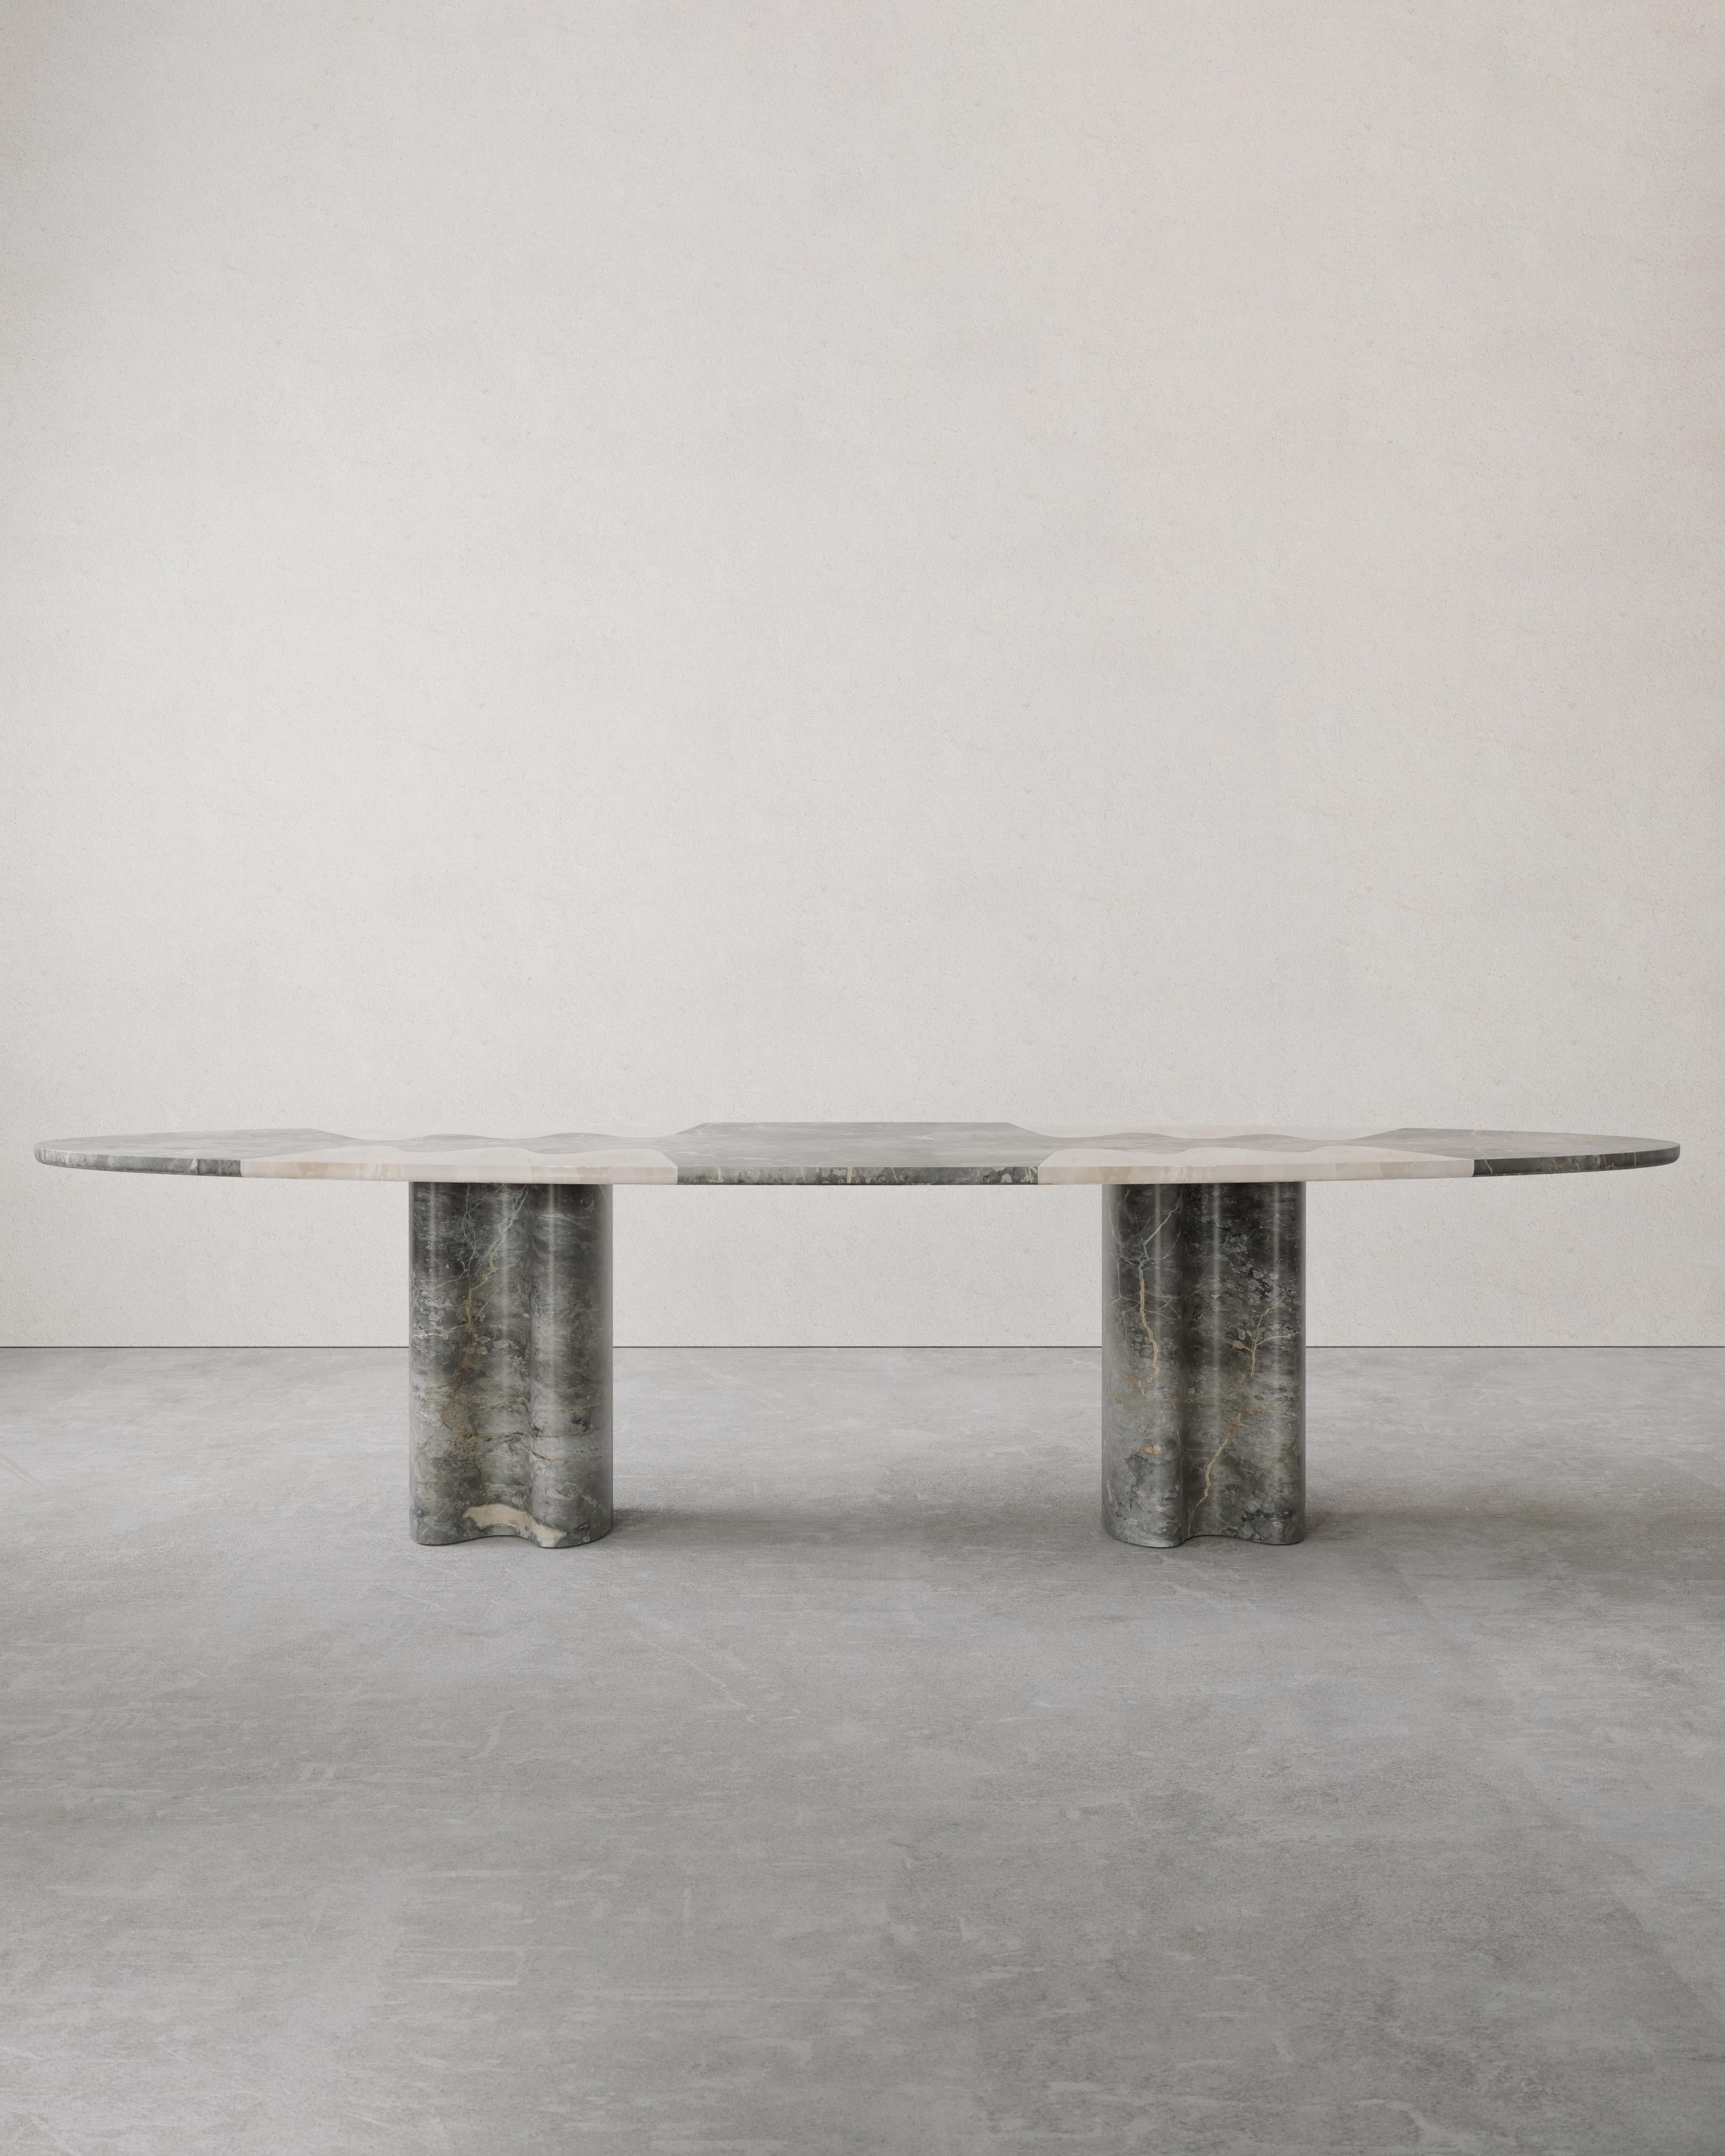 Lavanche dining table by Piotr Dabrowa
One of a kind.
Dimensions: W 300 x D 120 x H 72 cm.
Materials: Fior di Bosco marble, white Onyx.
Produced by Serafini.

Piotr Dabrowa (1990). Multidisciplinary Designer focused on the collectible design